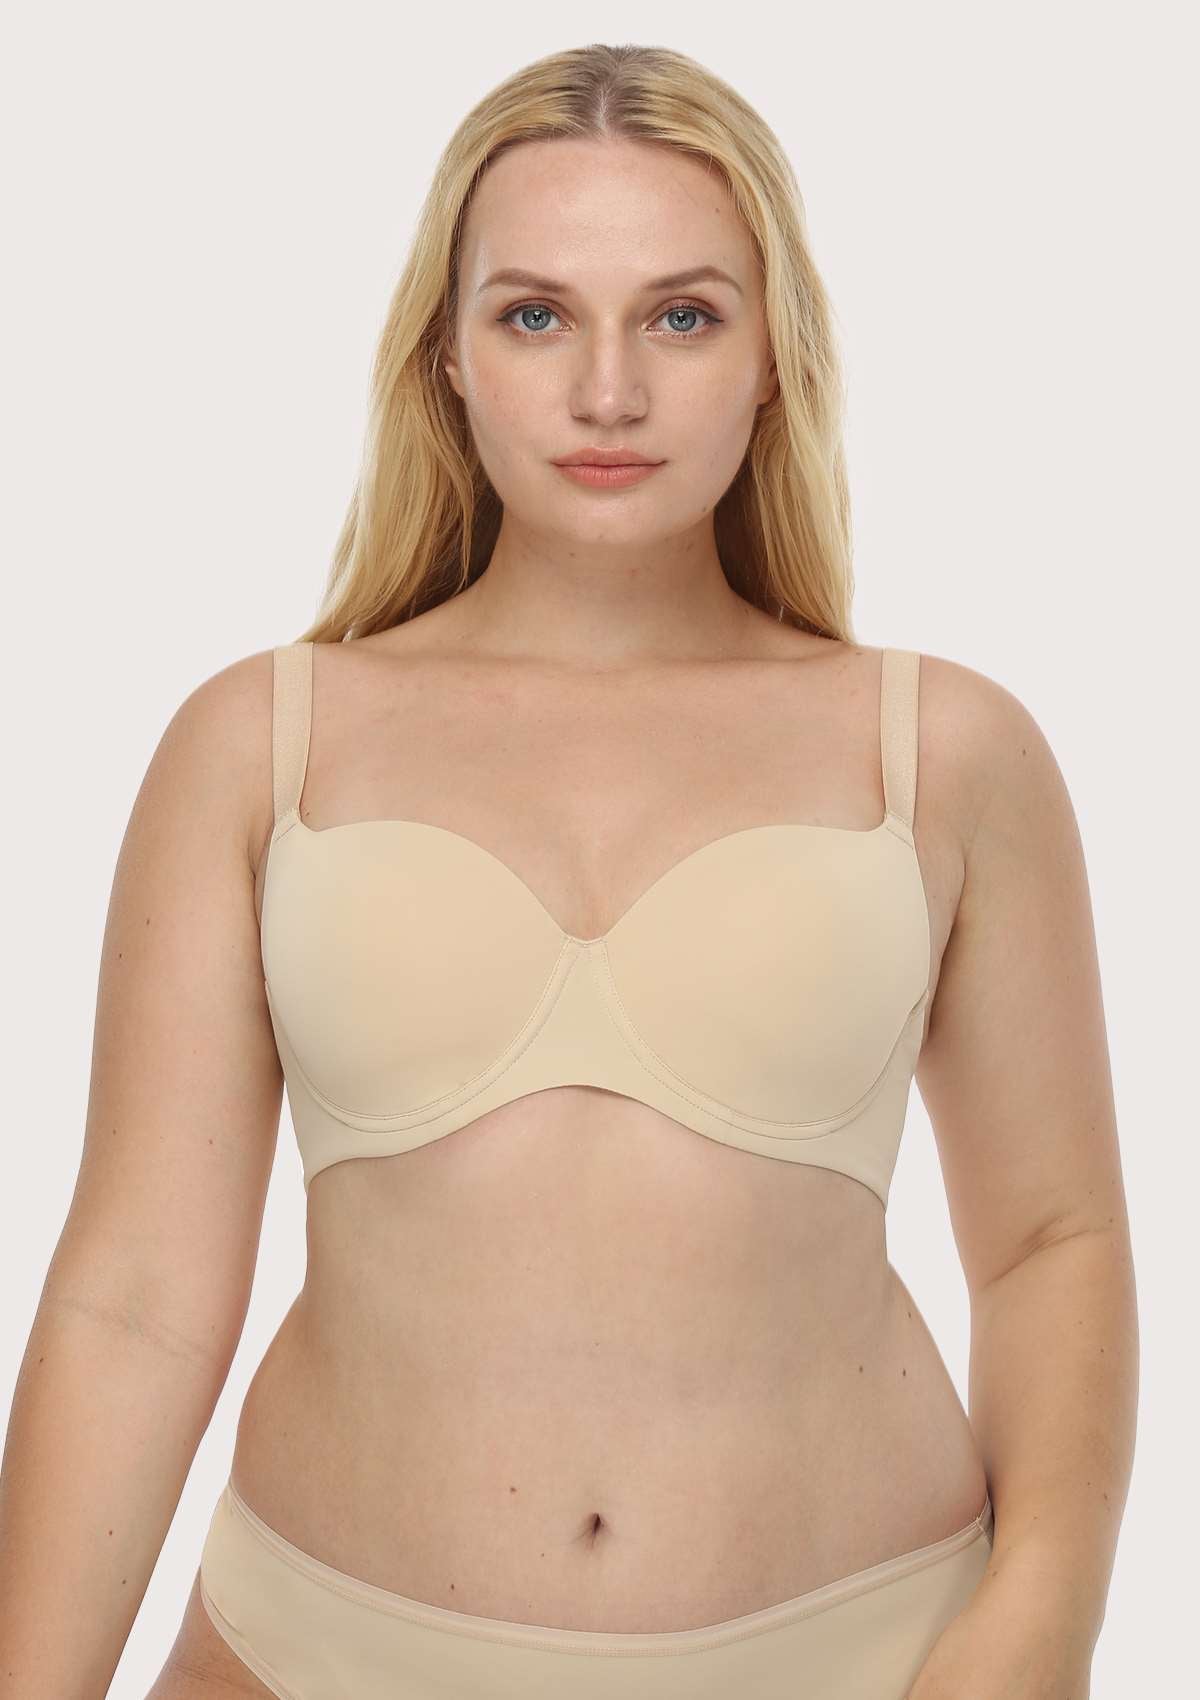 HSIA Gemma Smooth Padded T-shirt Everyday Bras - For Lift And Comfort - Beige / 38 / D